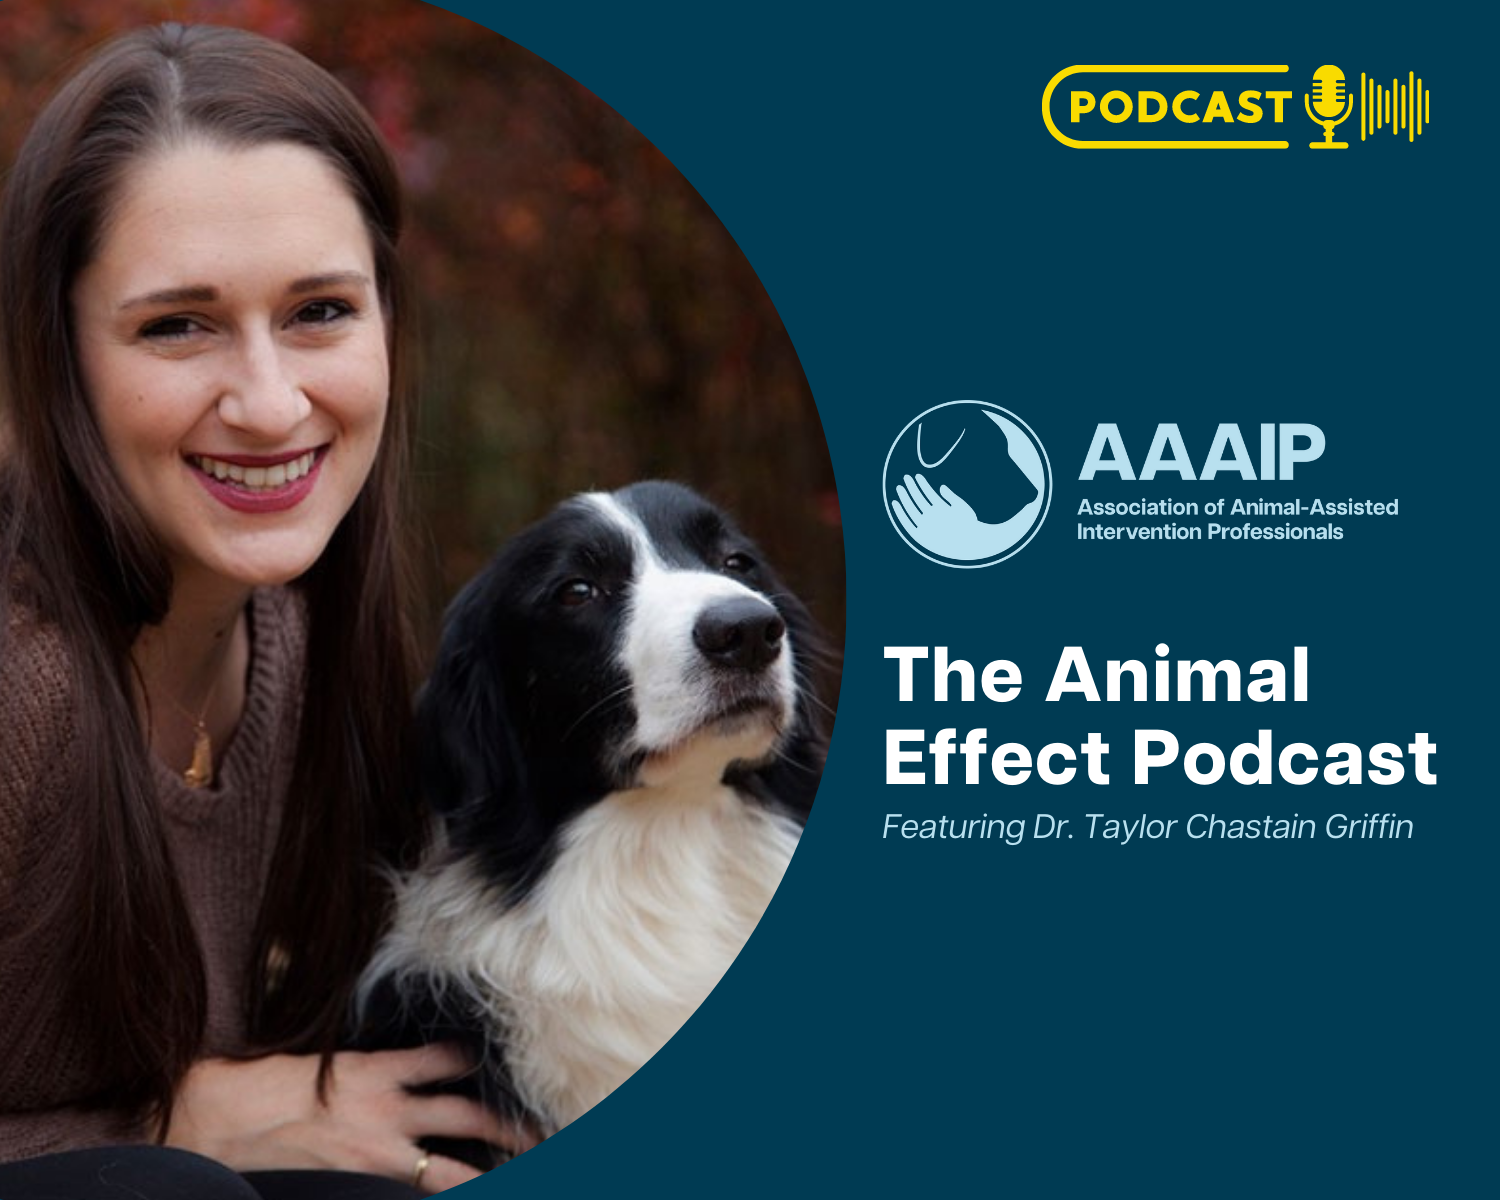 The Animal Effect Podcast